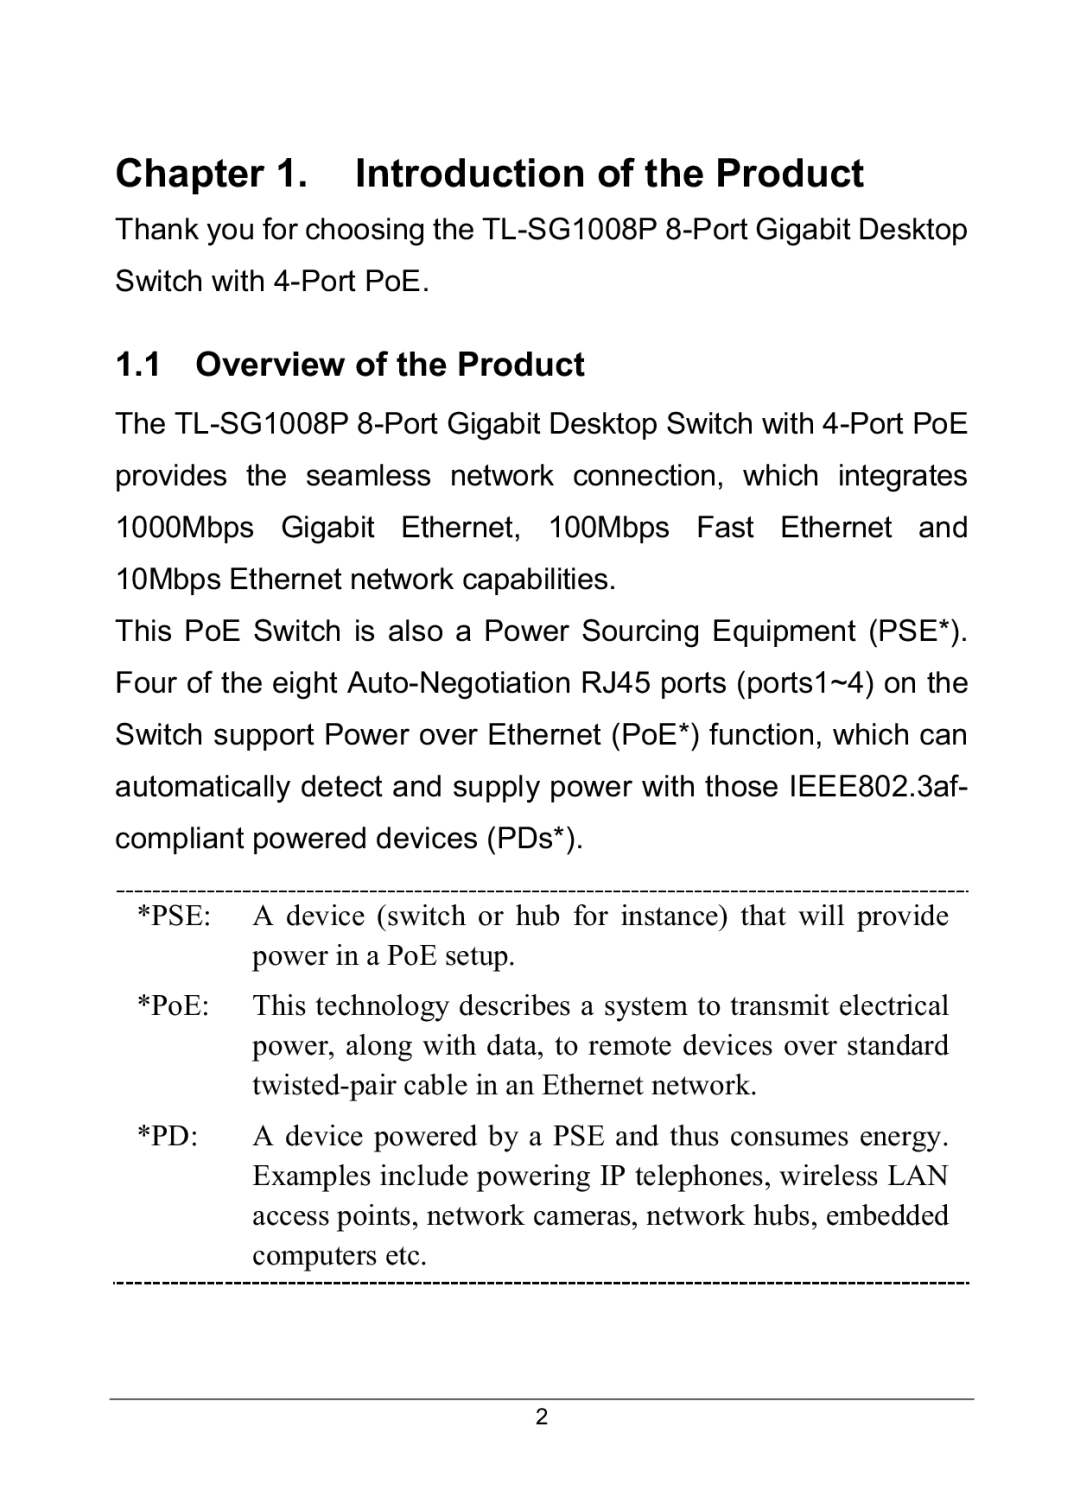 TP-Link TL-SG1008P manual Introduction of the Product, Overview of the Product 